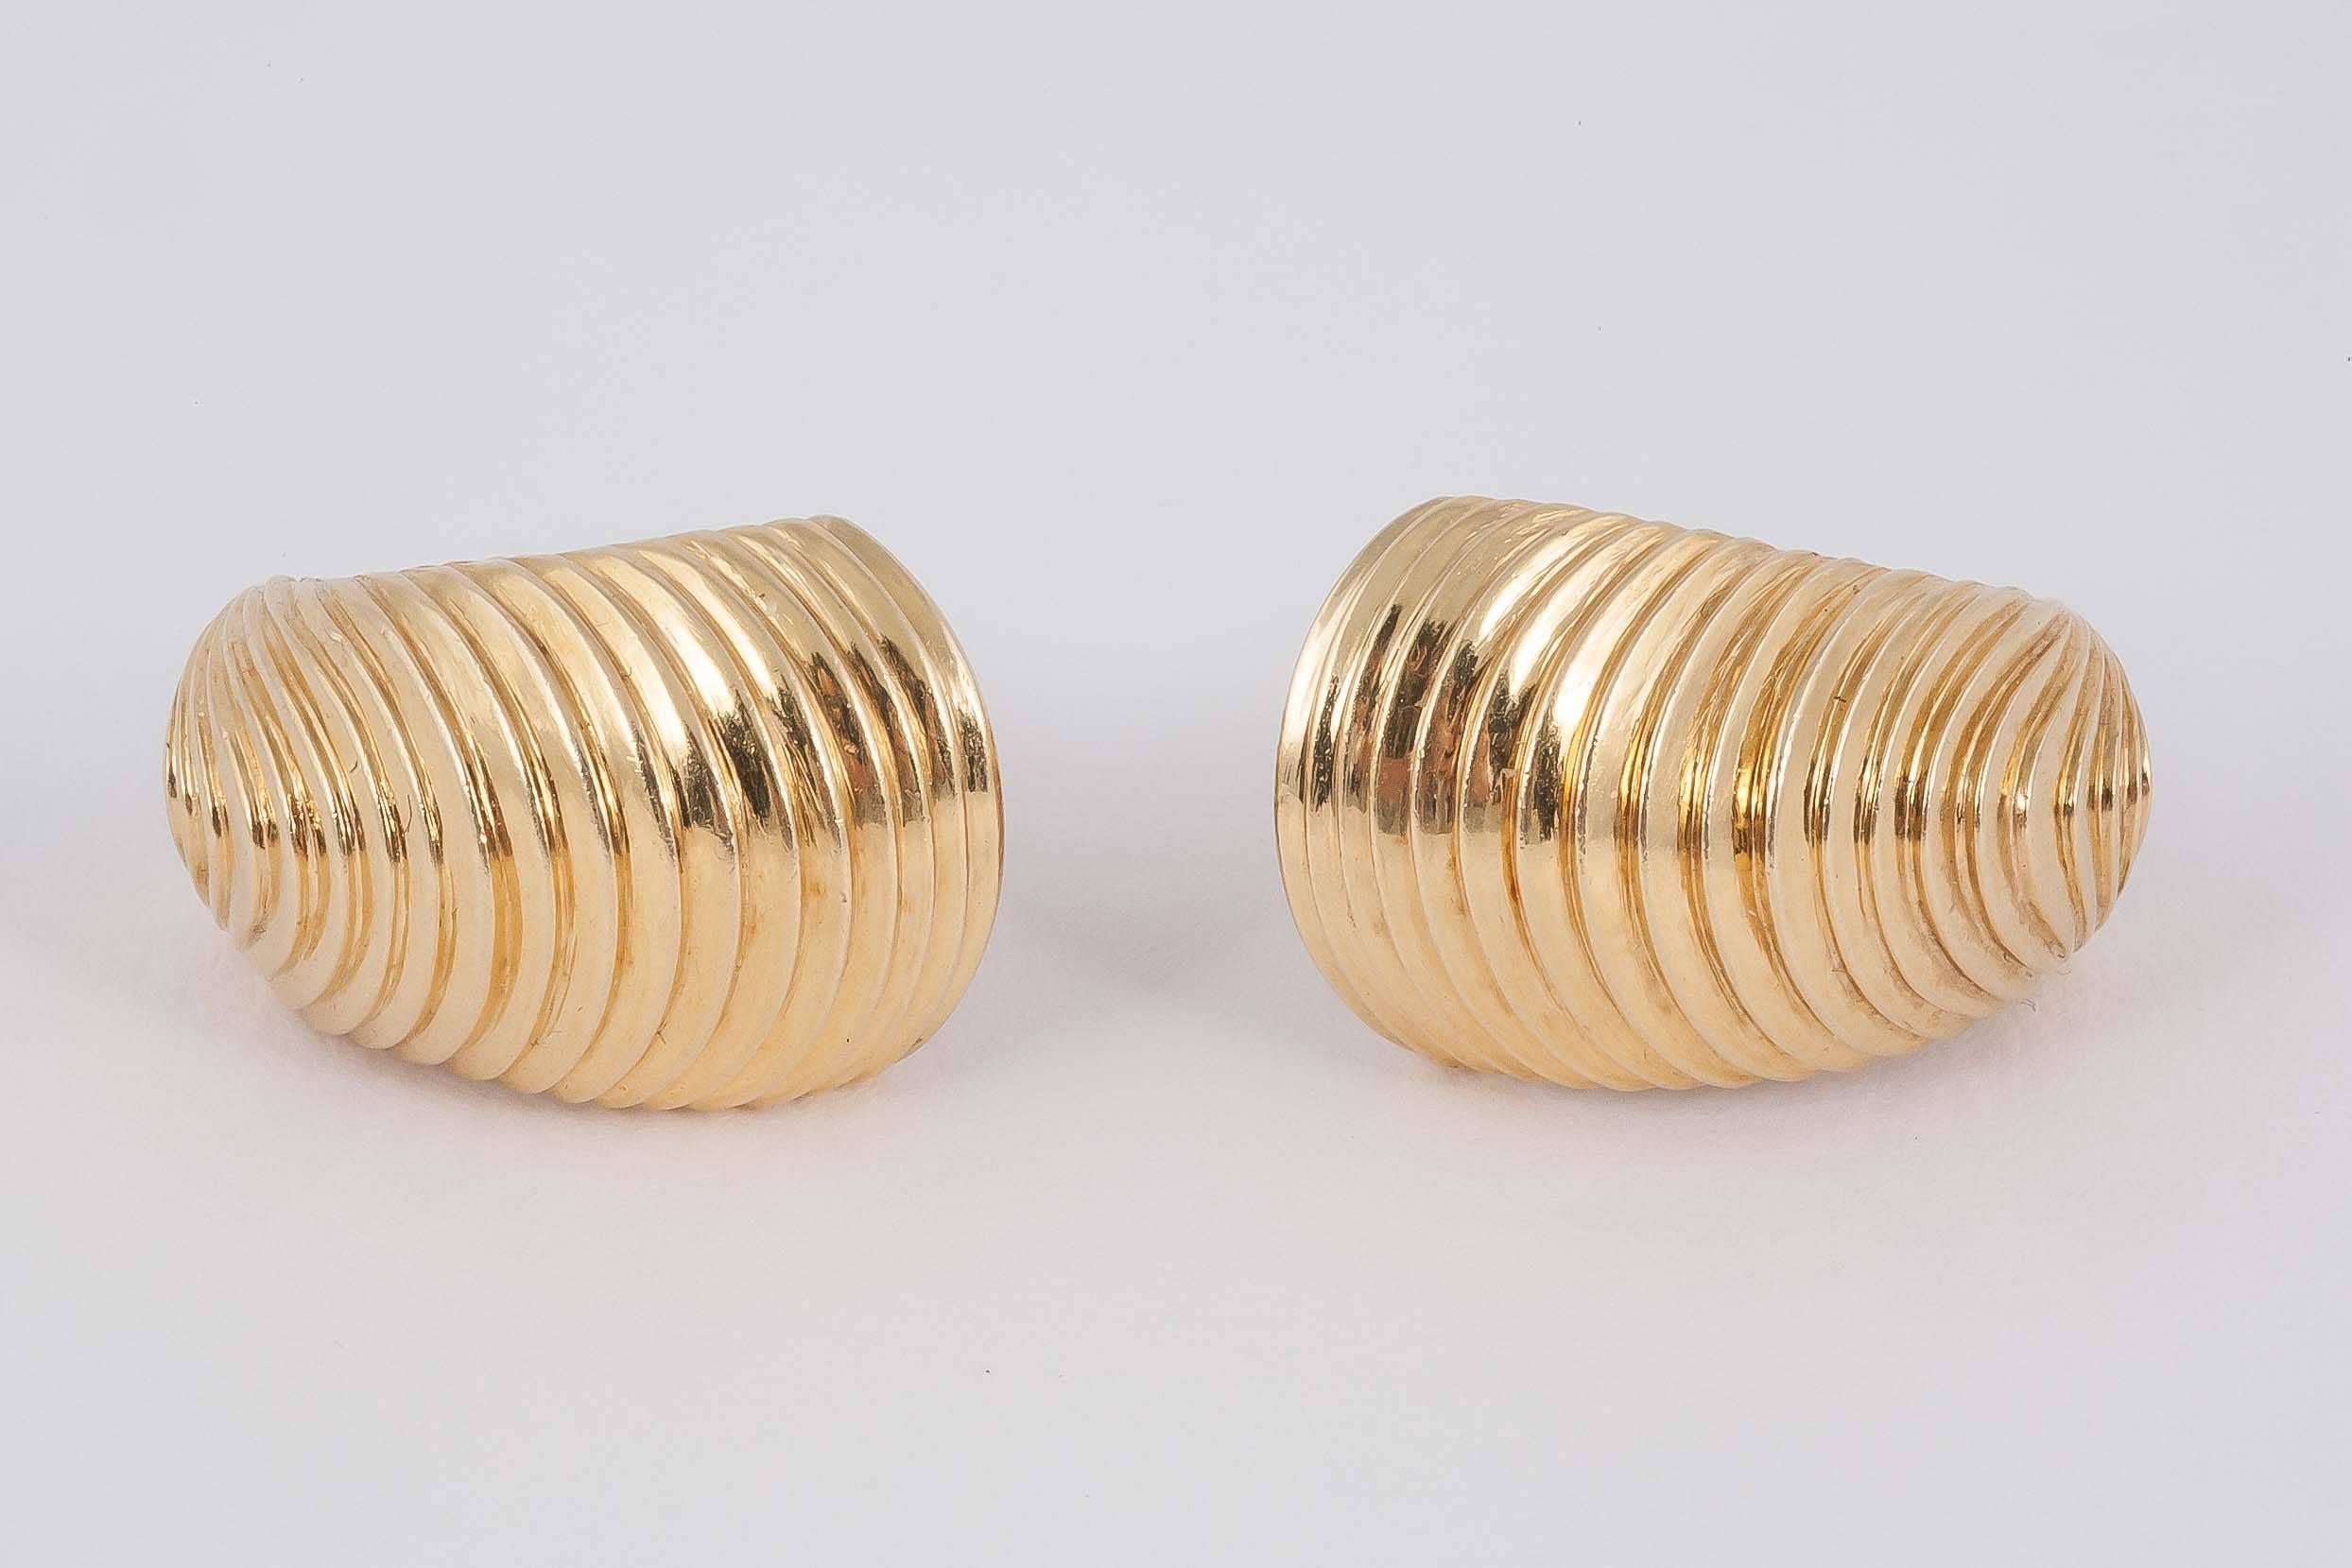 18ct Gold earclips in shell shape form with original fittings in original case